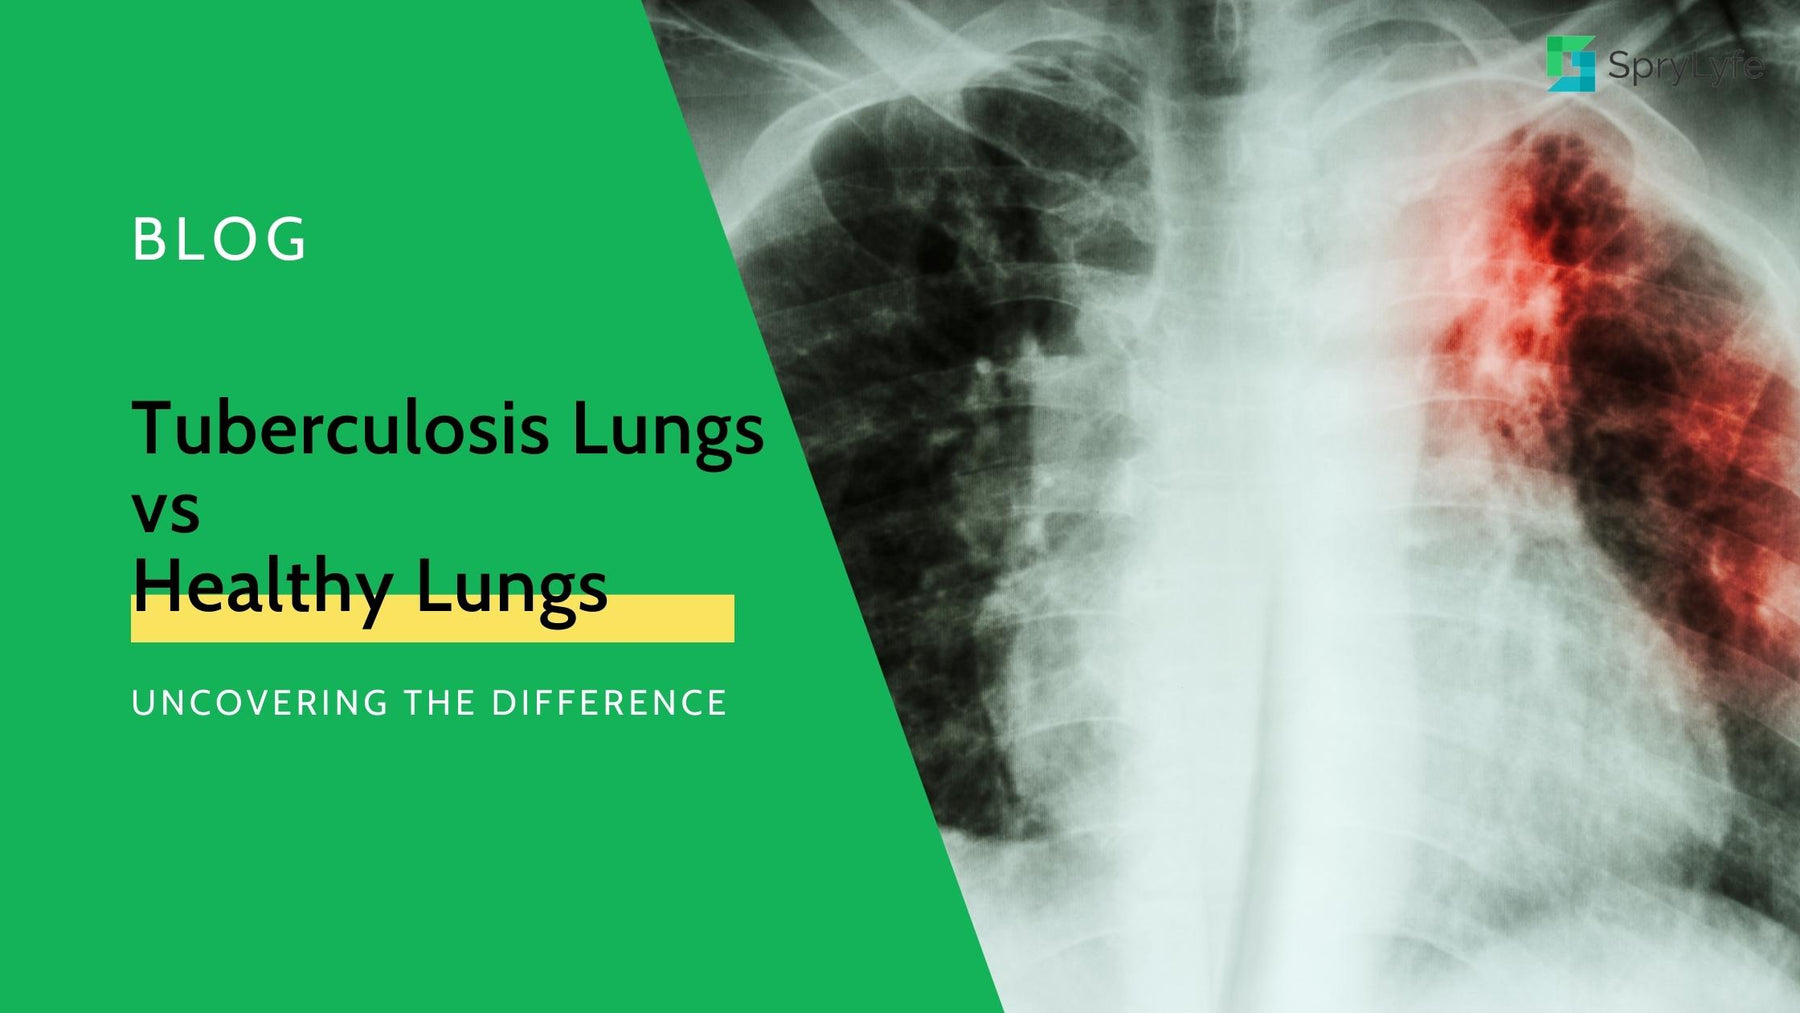 Tuberculosis Lungs vs Healthy Lungs: Uncovering the Difference